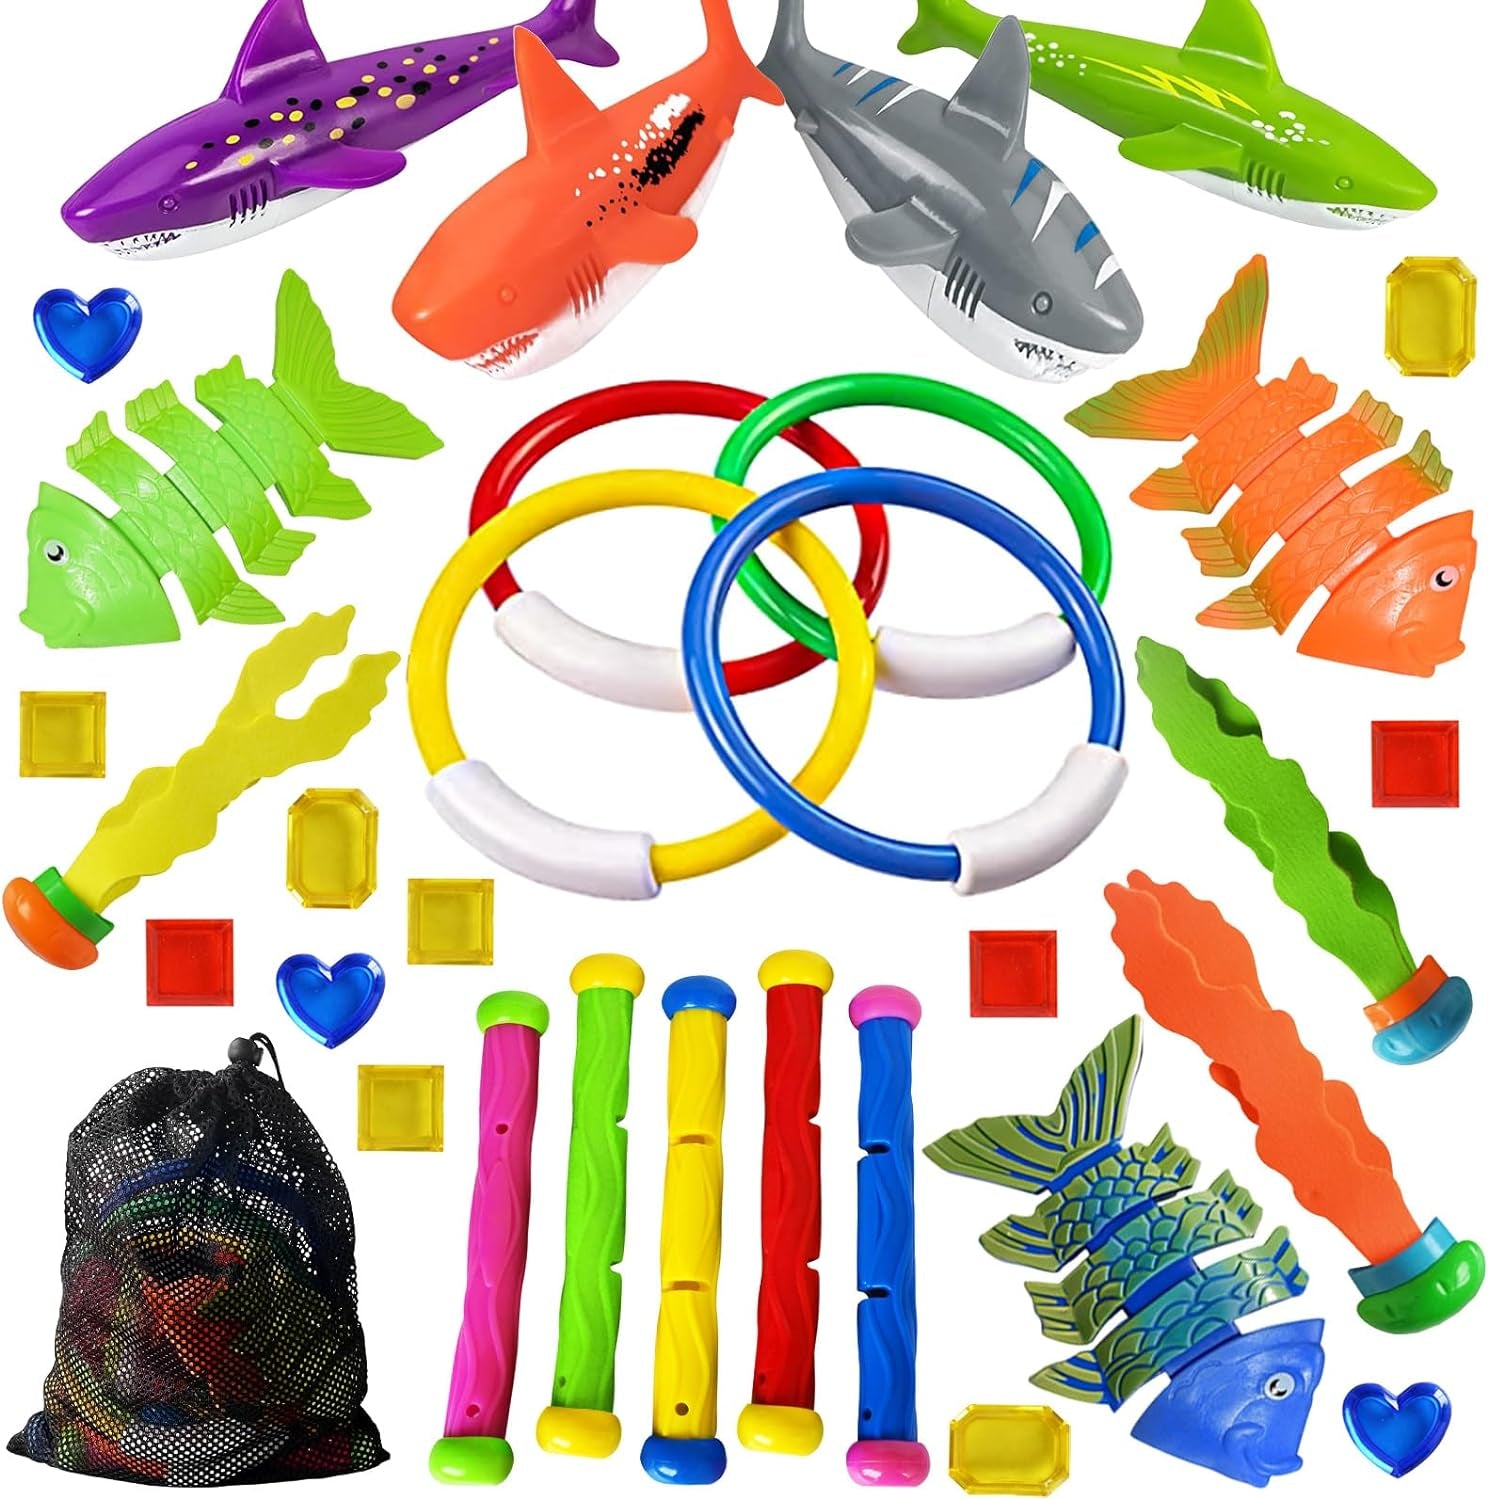 Pool Diving Toys Games - 31 PCS Swimming Pool Toys for Kids Teens with Diving Rings Dive Sticks Underwater Treasures Torpedo Bandits Fish Toys Etc Fun Water Swim Toys for Boys Girls Adults